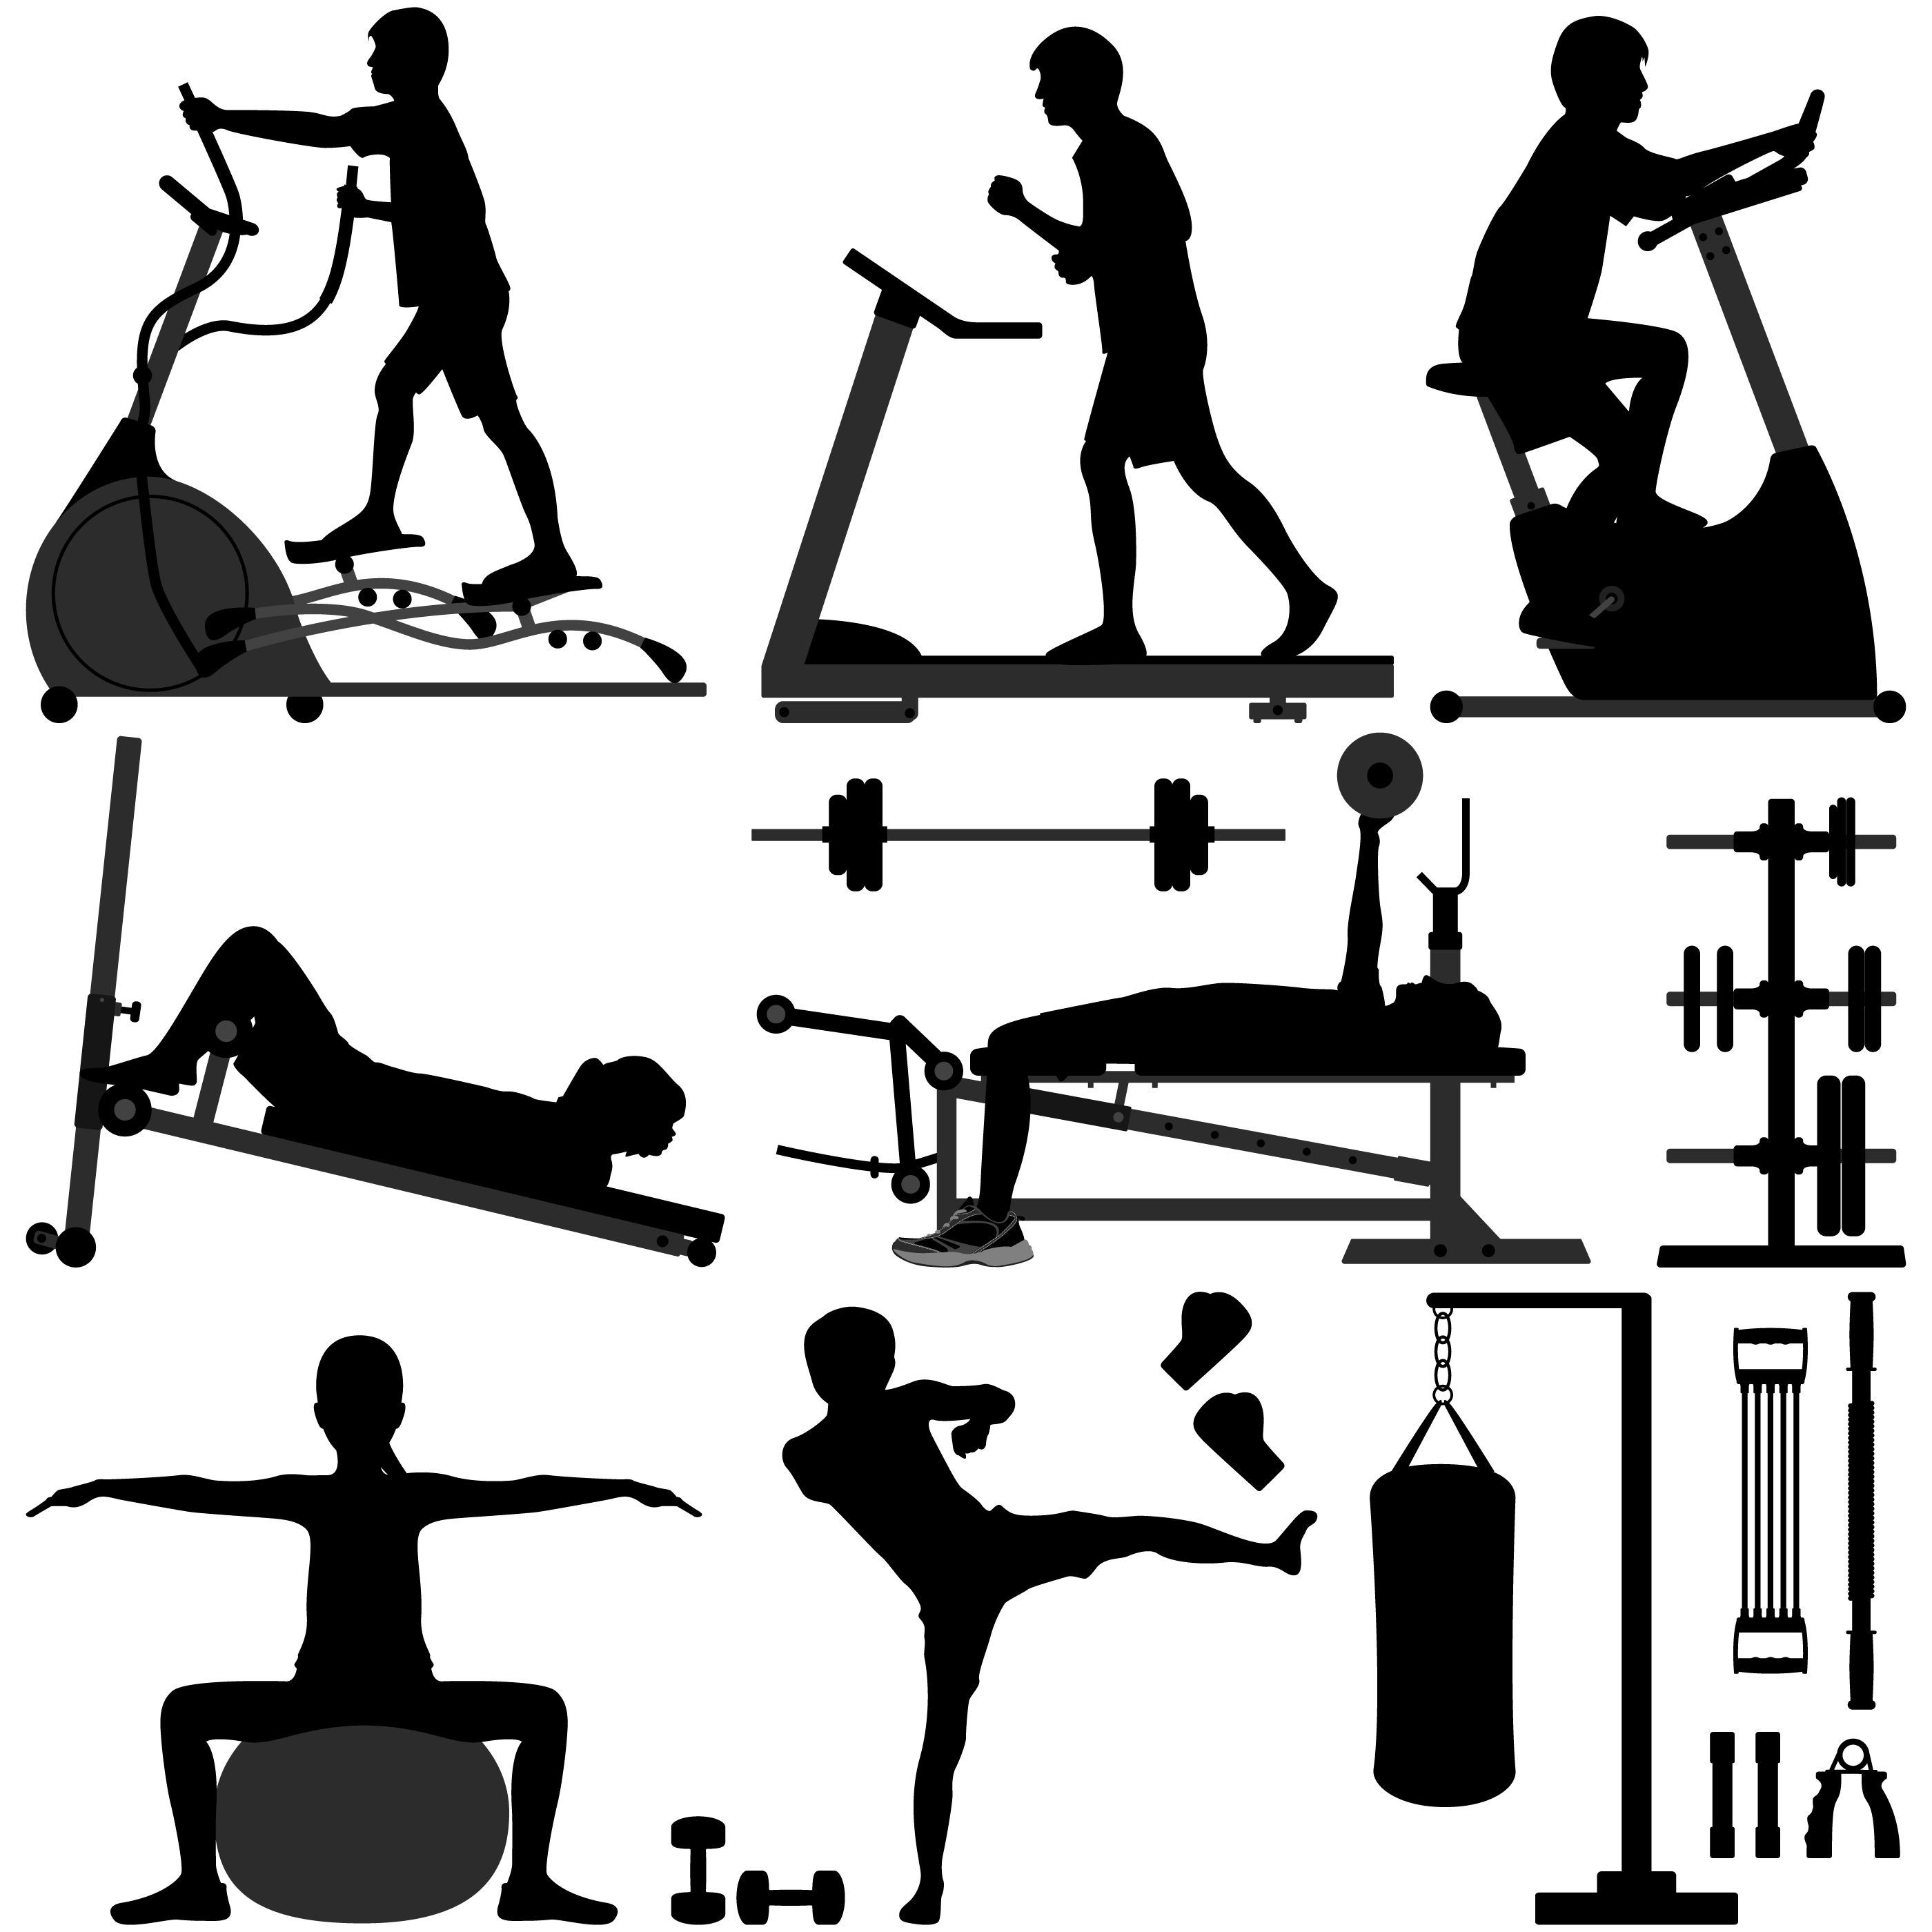 6 Day Free Workout Clipart Images for Burn Fat fast